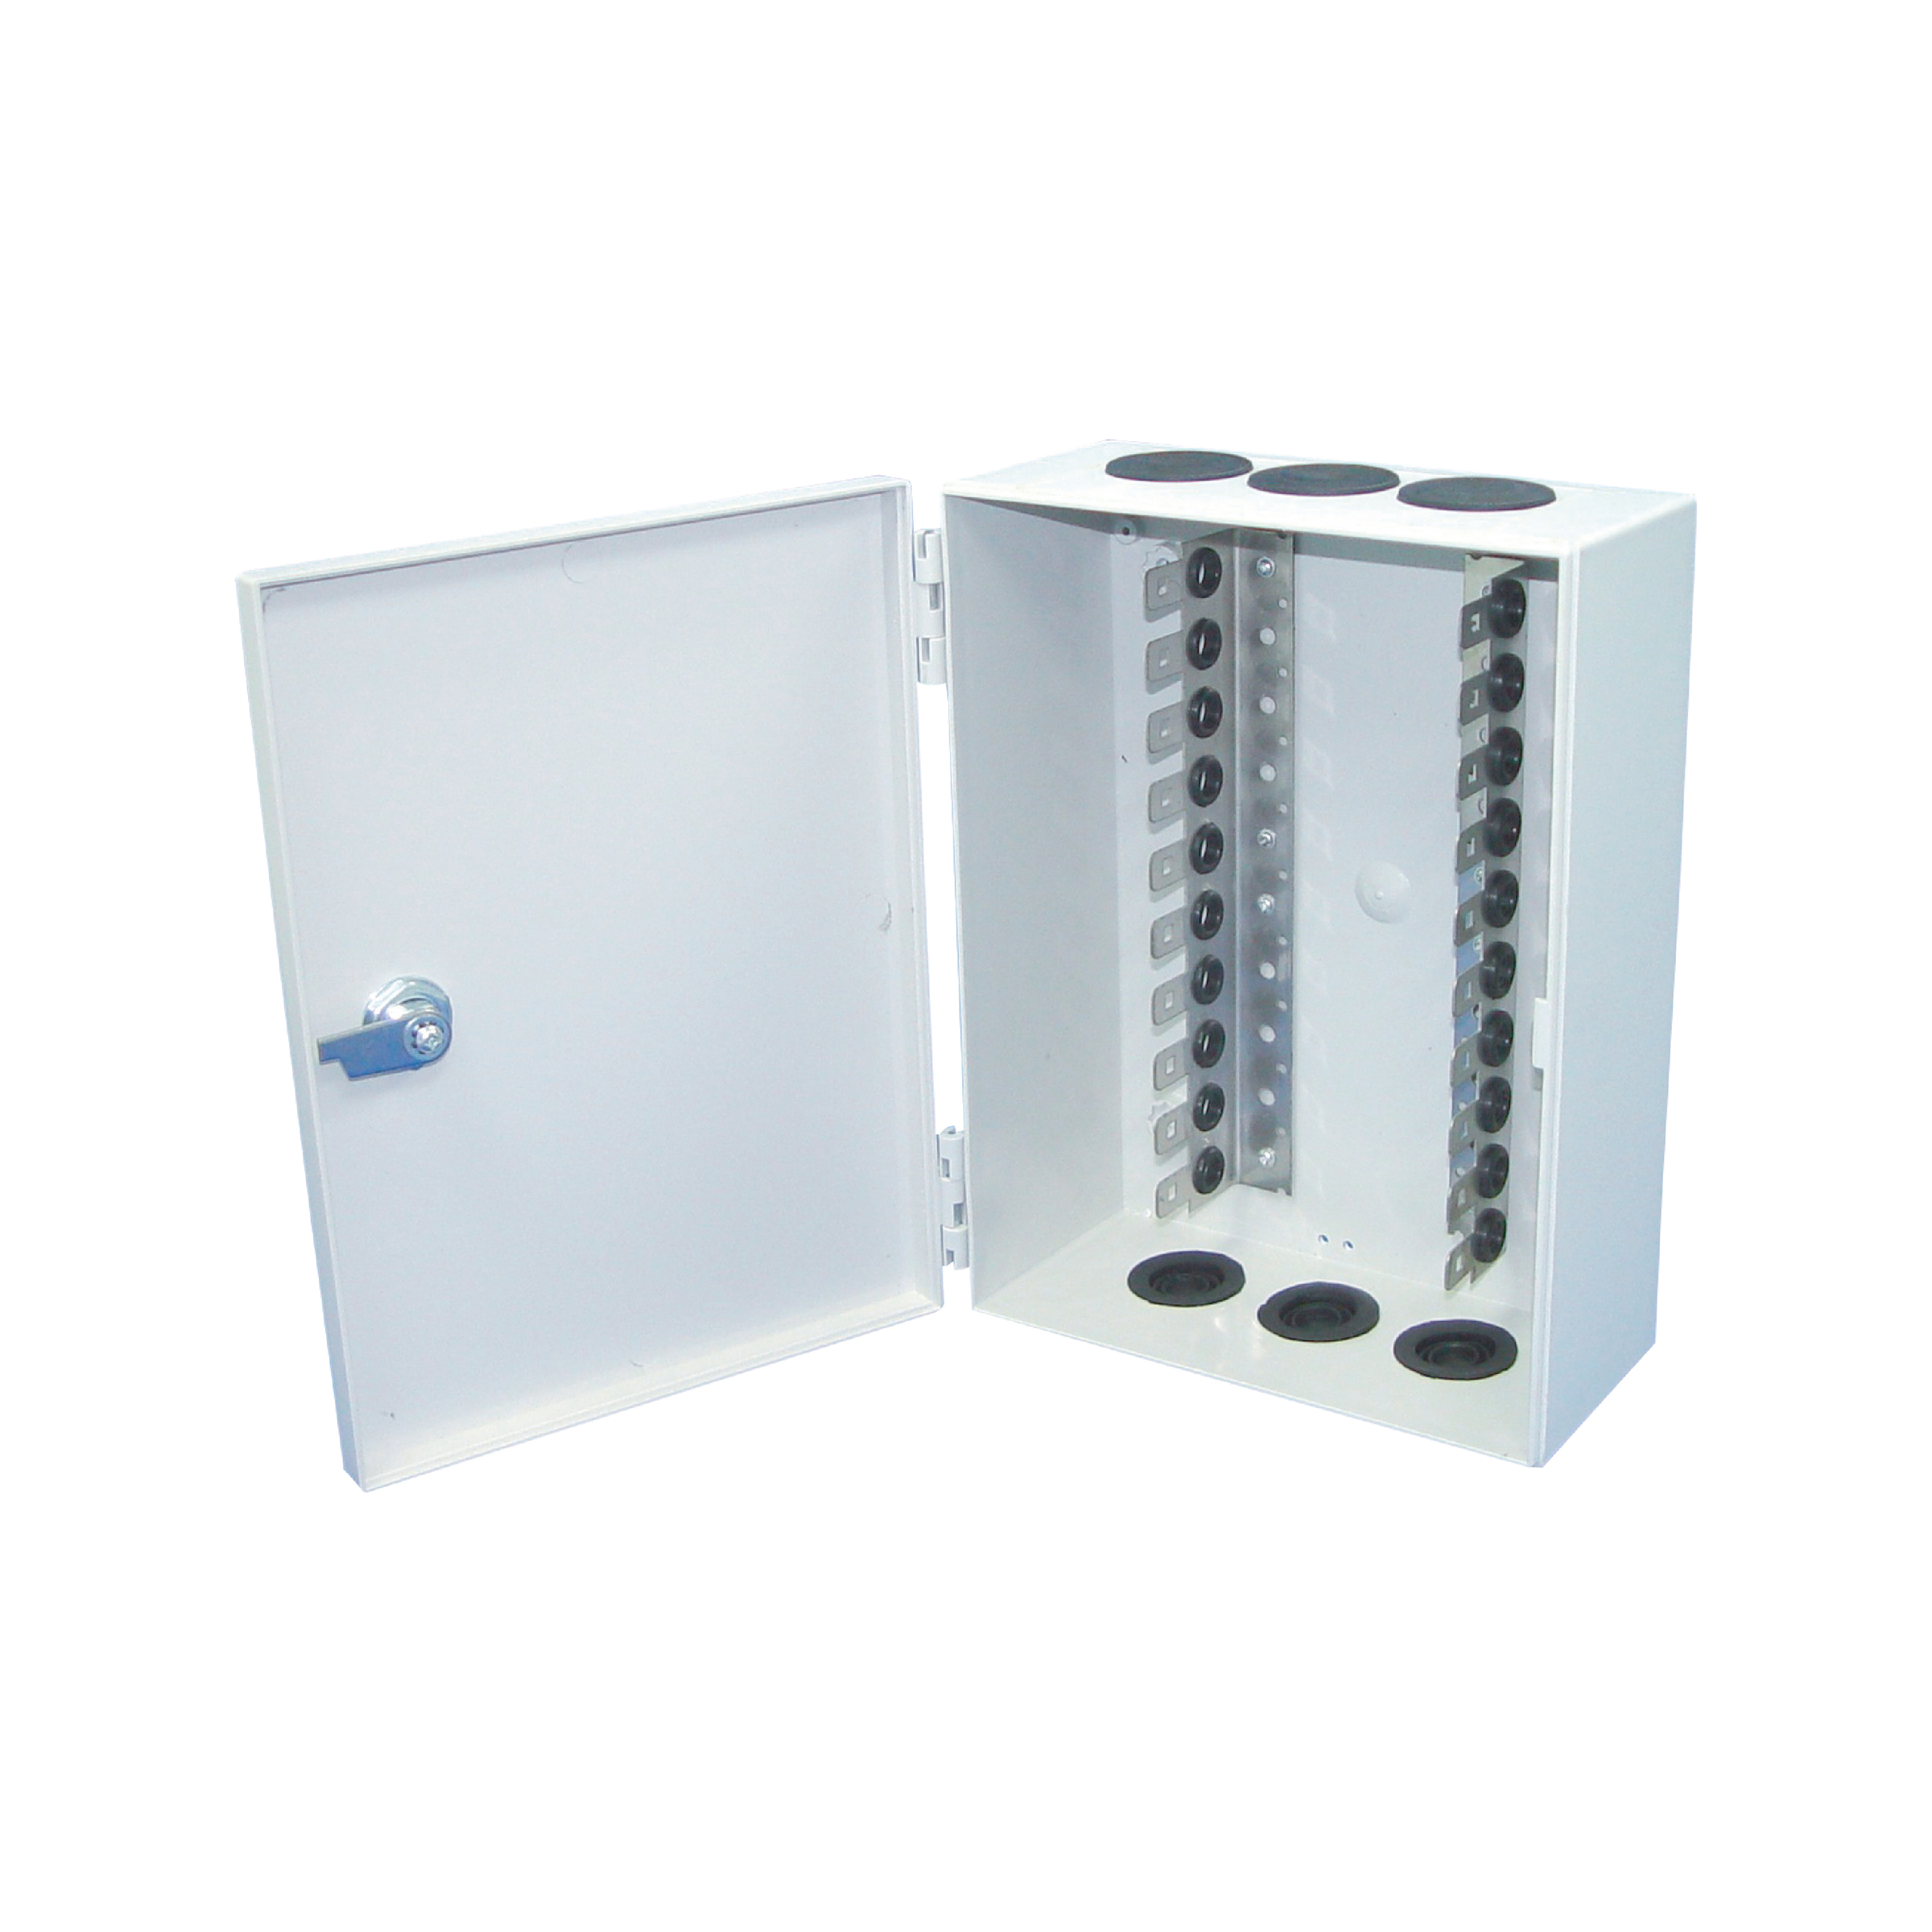 Voice & Data_Modular Connecting System_Wall Mount DP_100 Pairs (Plastic).jpg